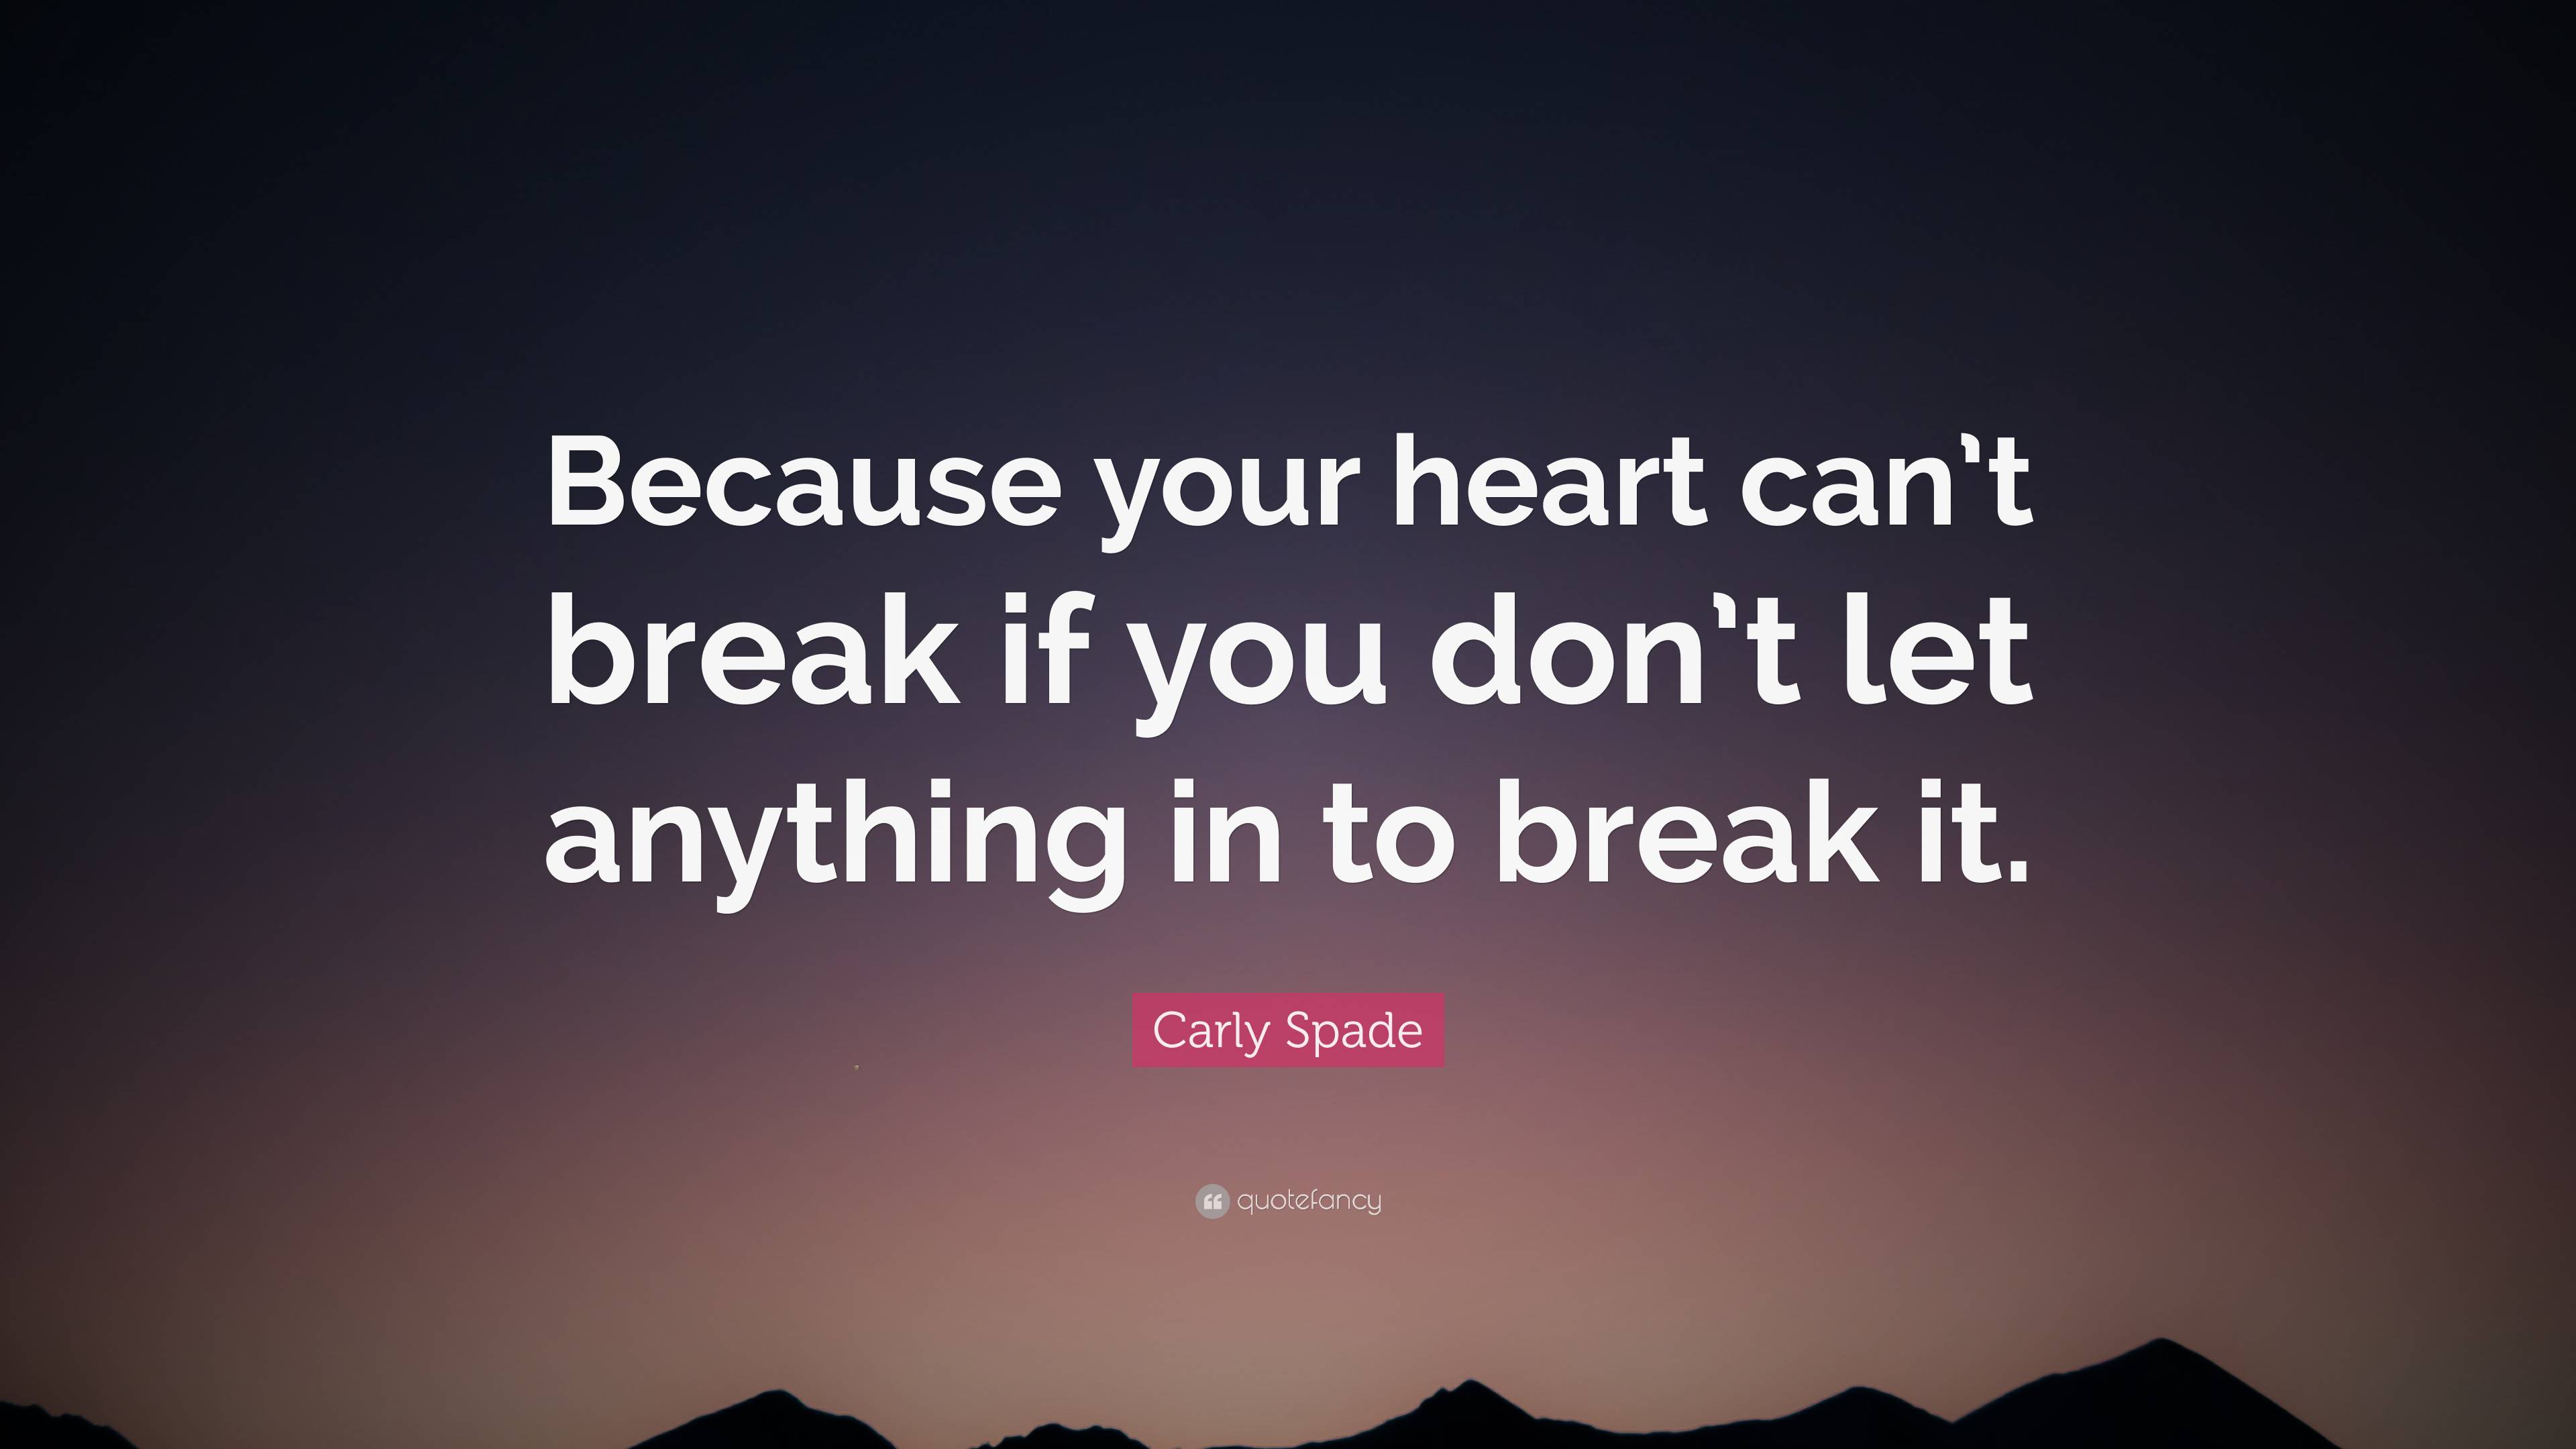 Carly Spade Quote: “Because your heart can’t break if you don’t let ...